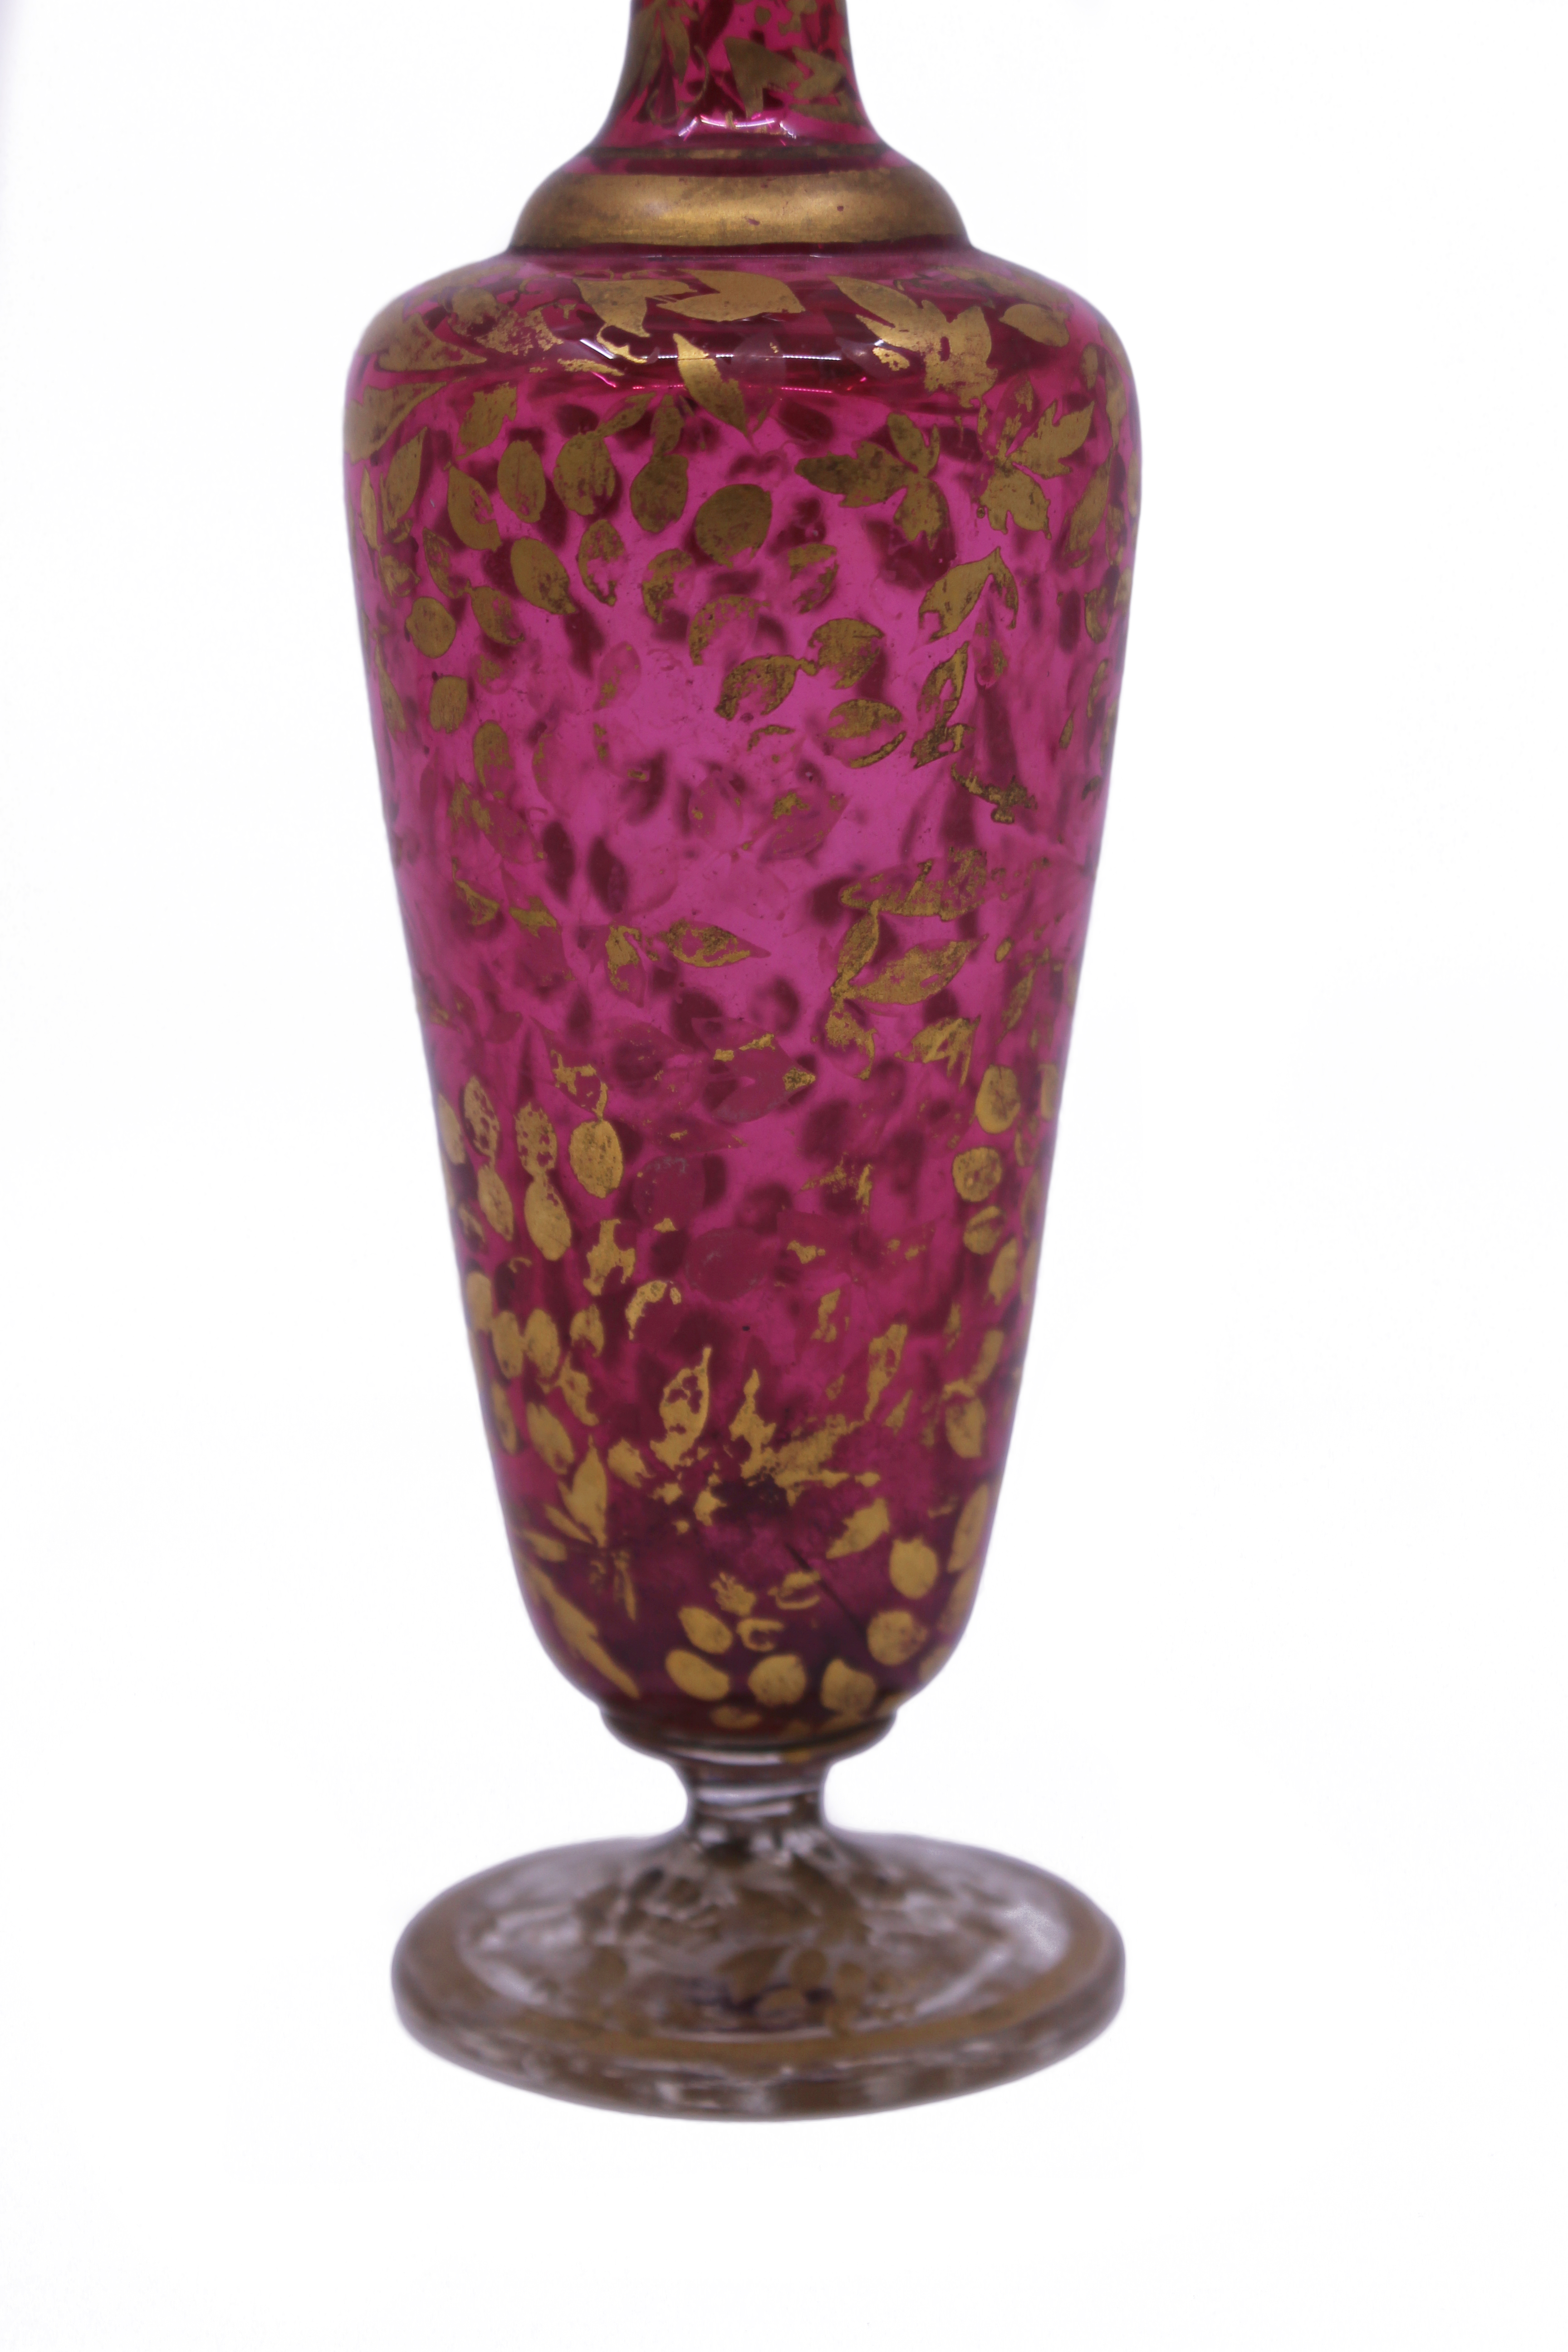 Antique Early 19th c. Gilded Cranberry Glass Vase - Image 6 of 6